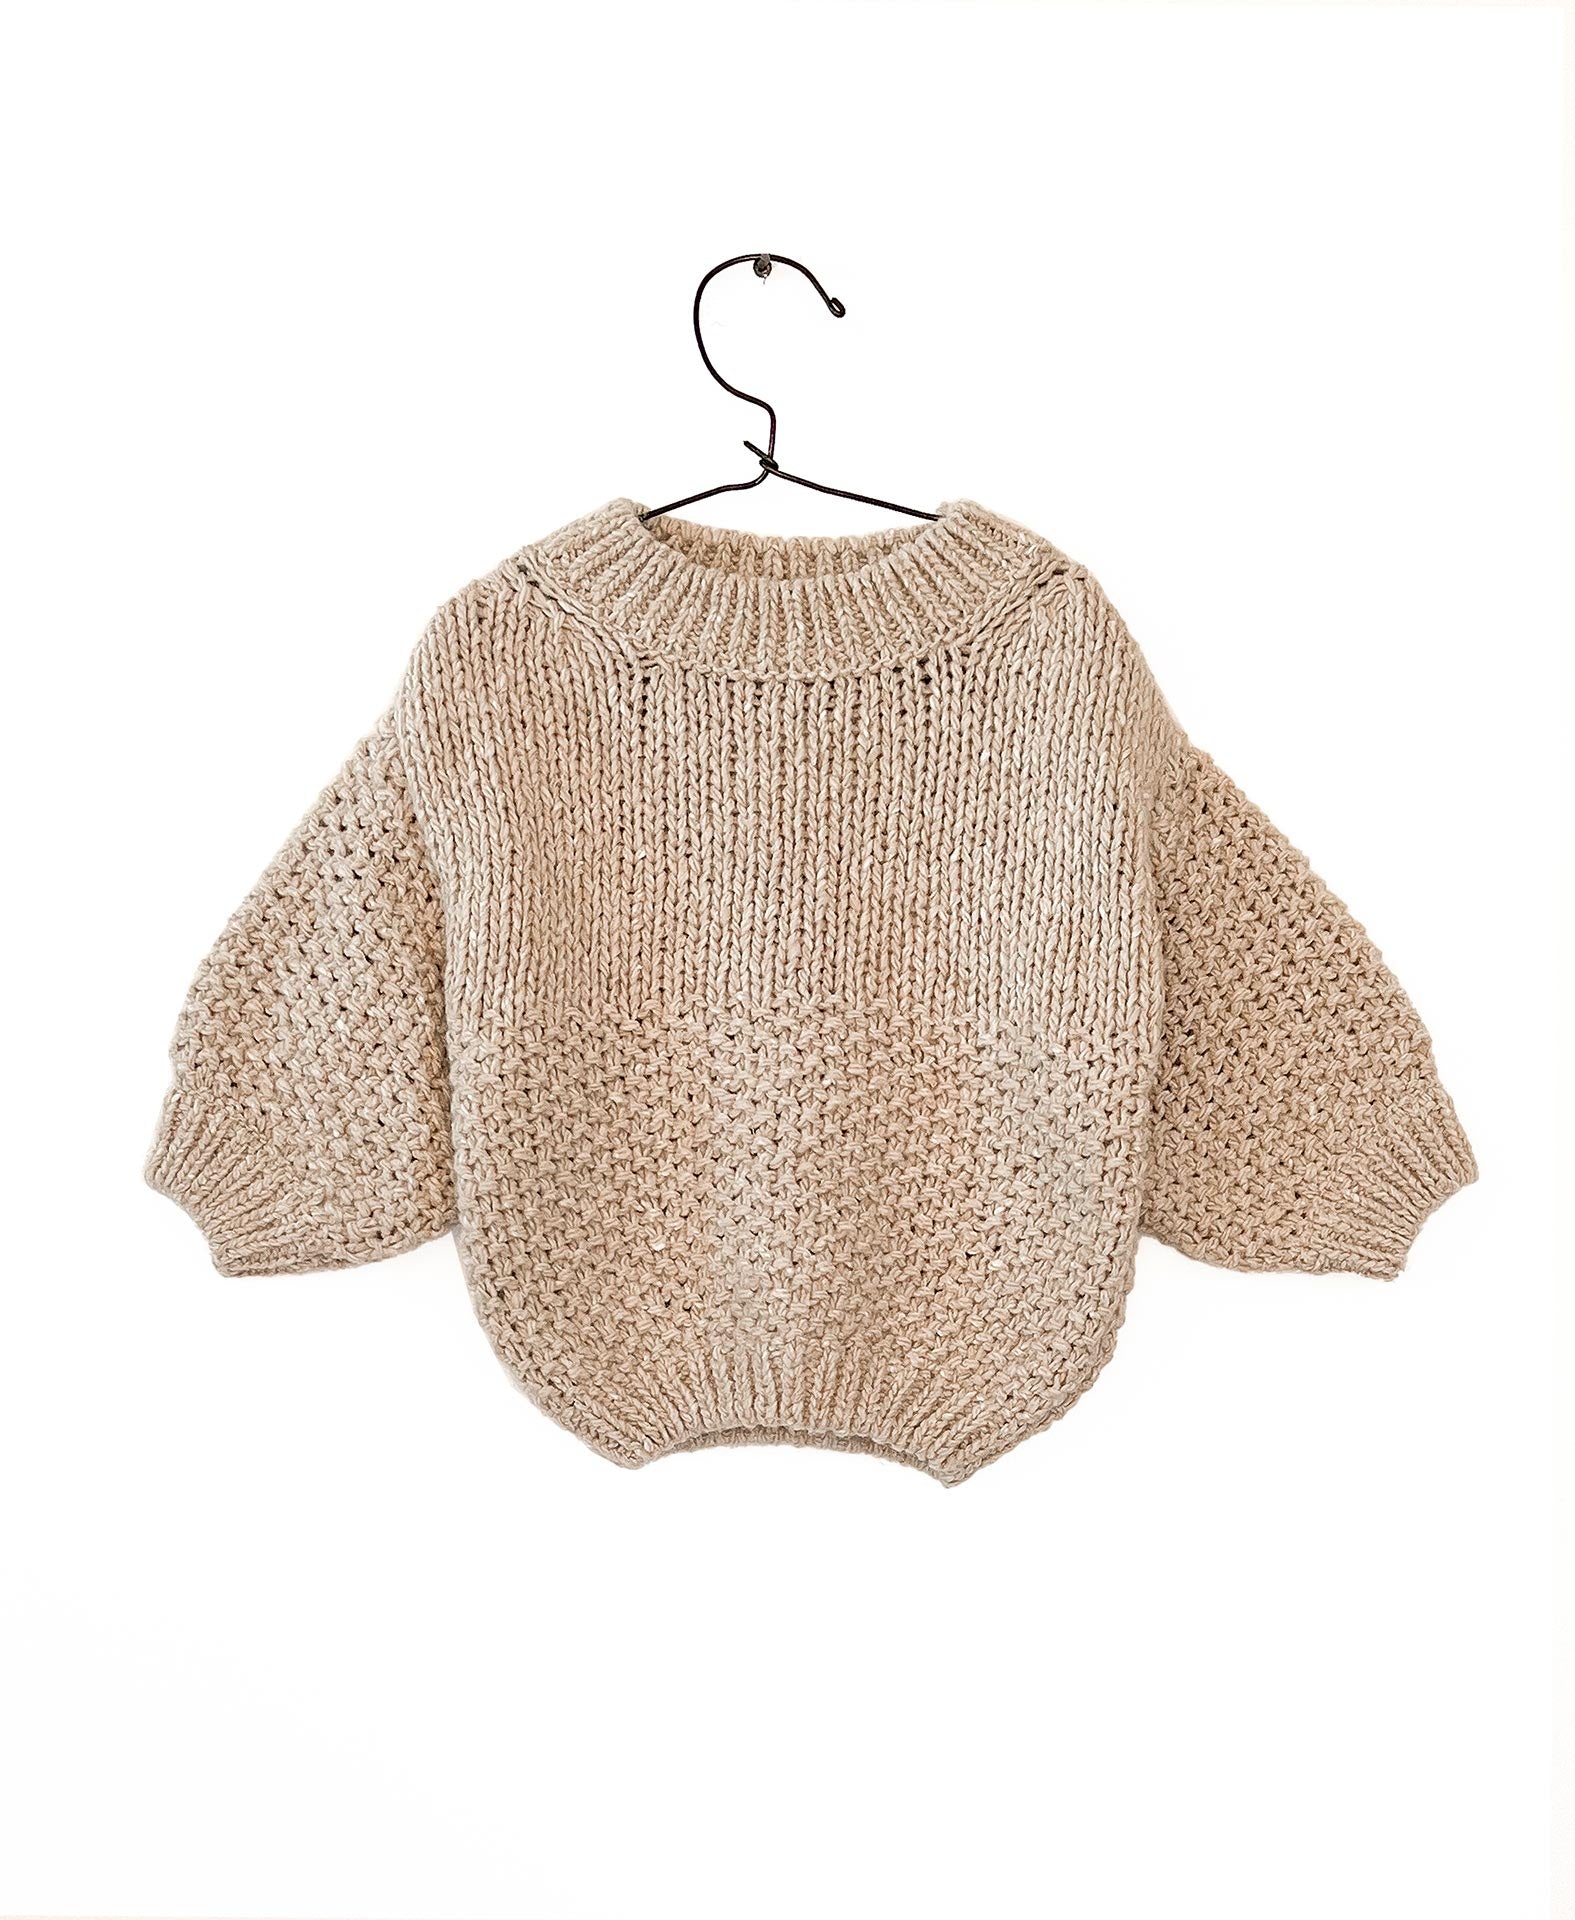 Play Up - knitted sweater - susana